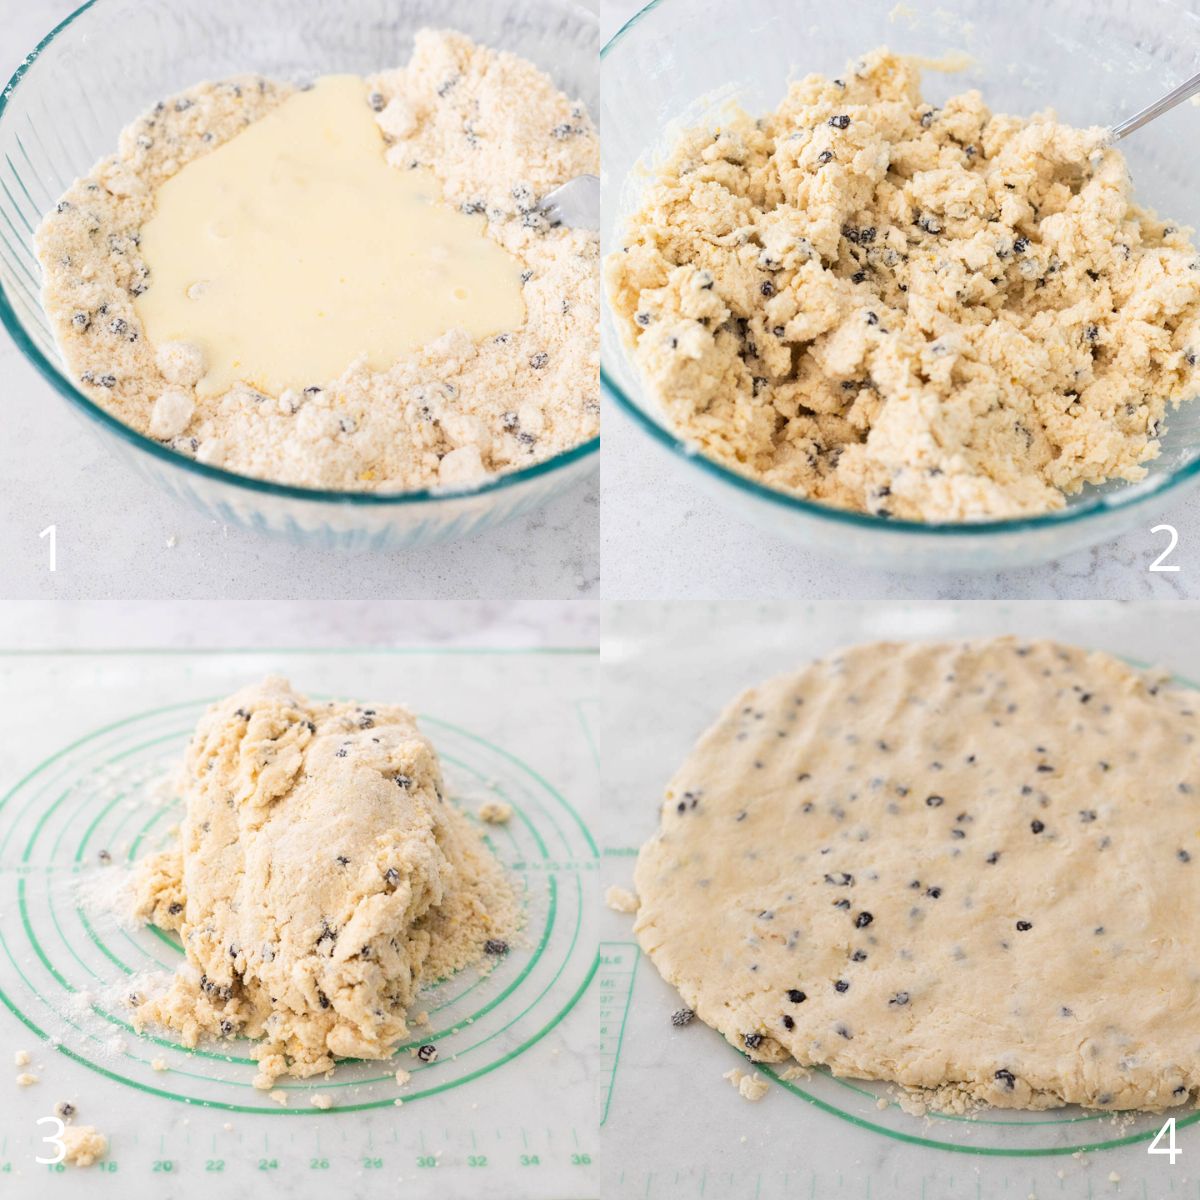 The step by step photos show how to work the biscuit dough into shape for cutting.